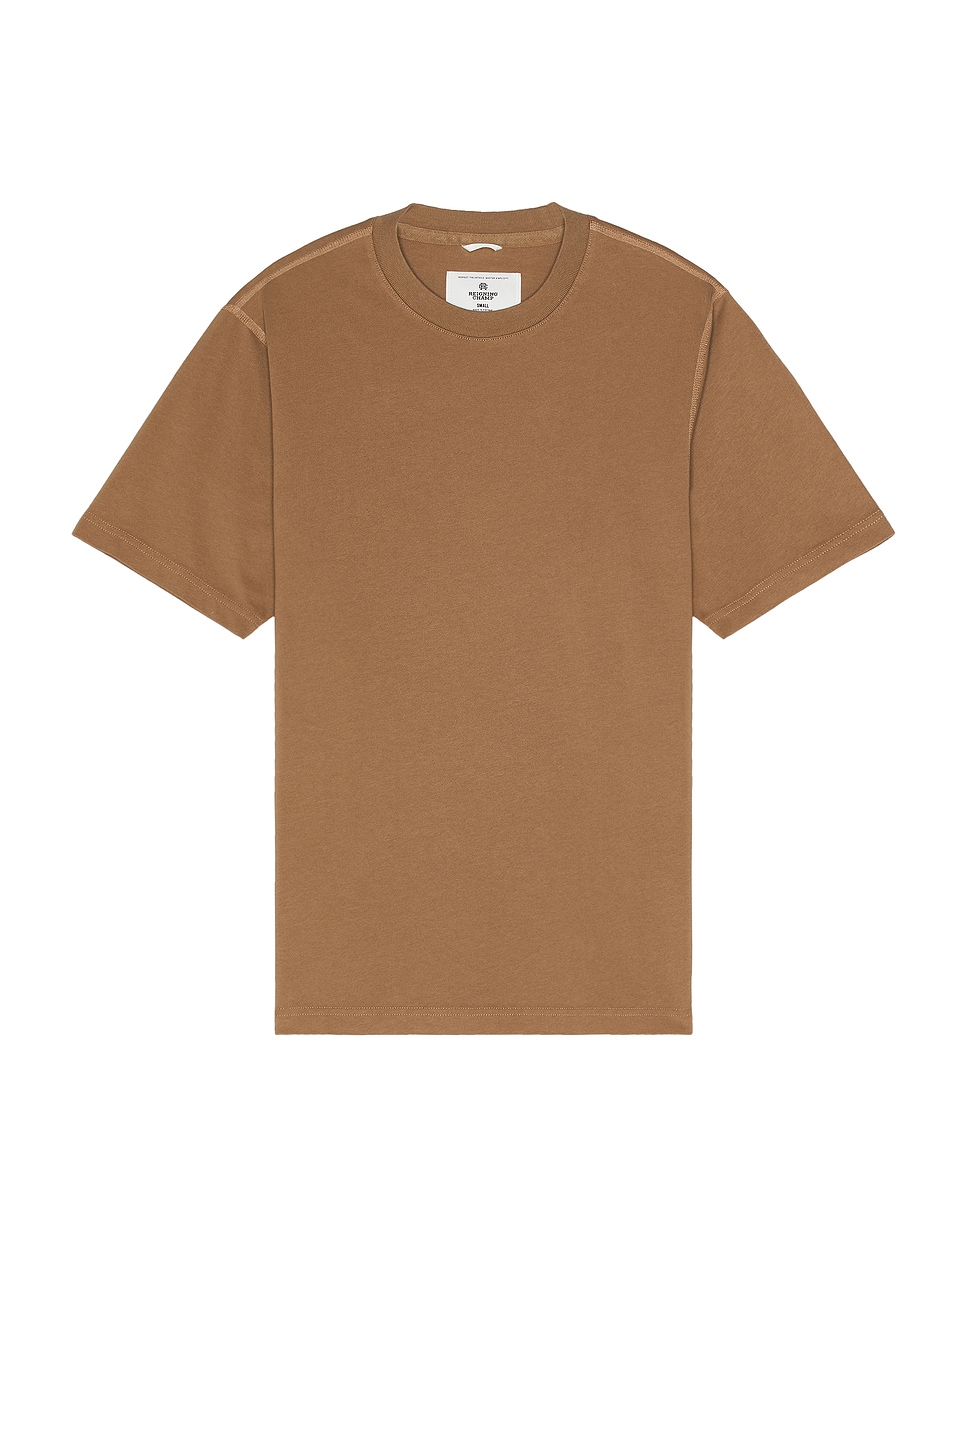 Midweight Jersey Classic T-shirt in Brown